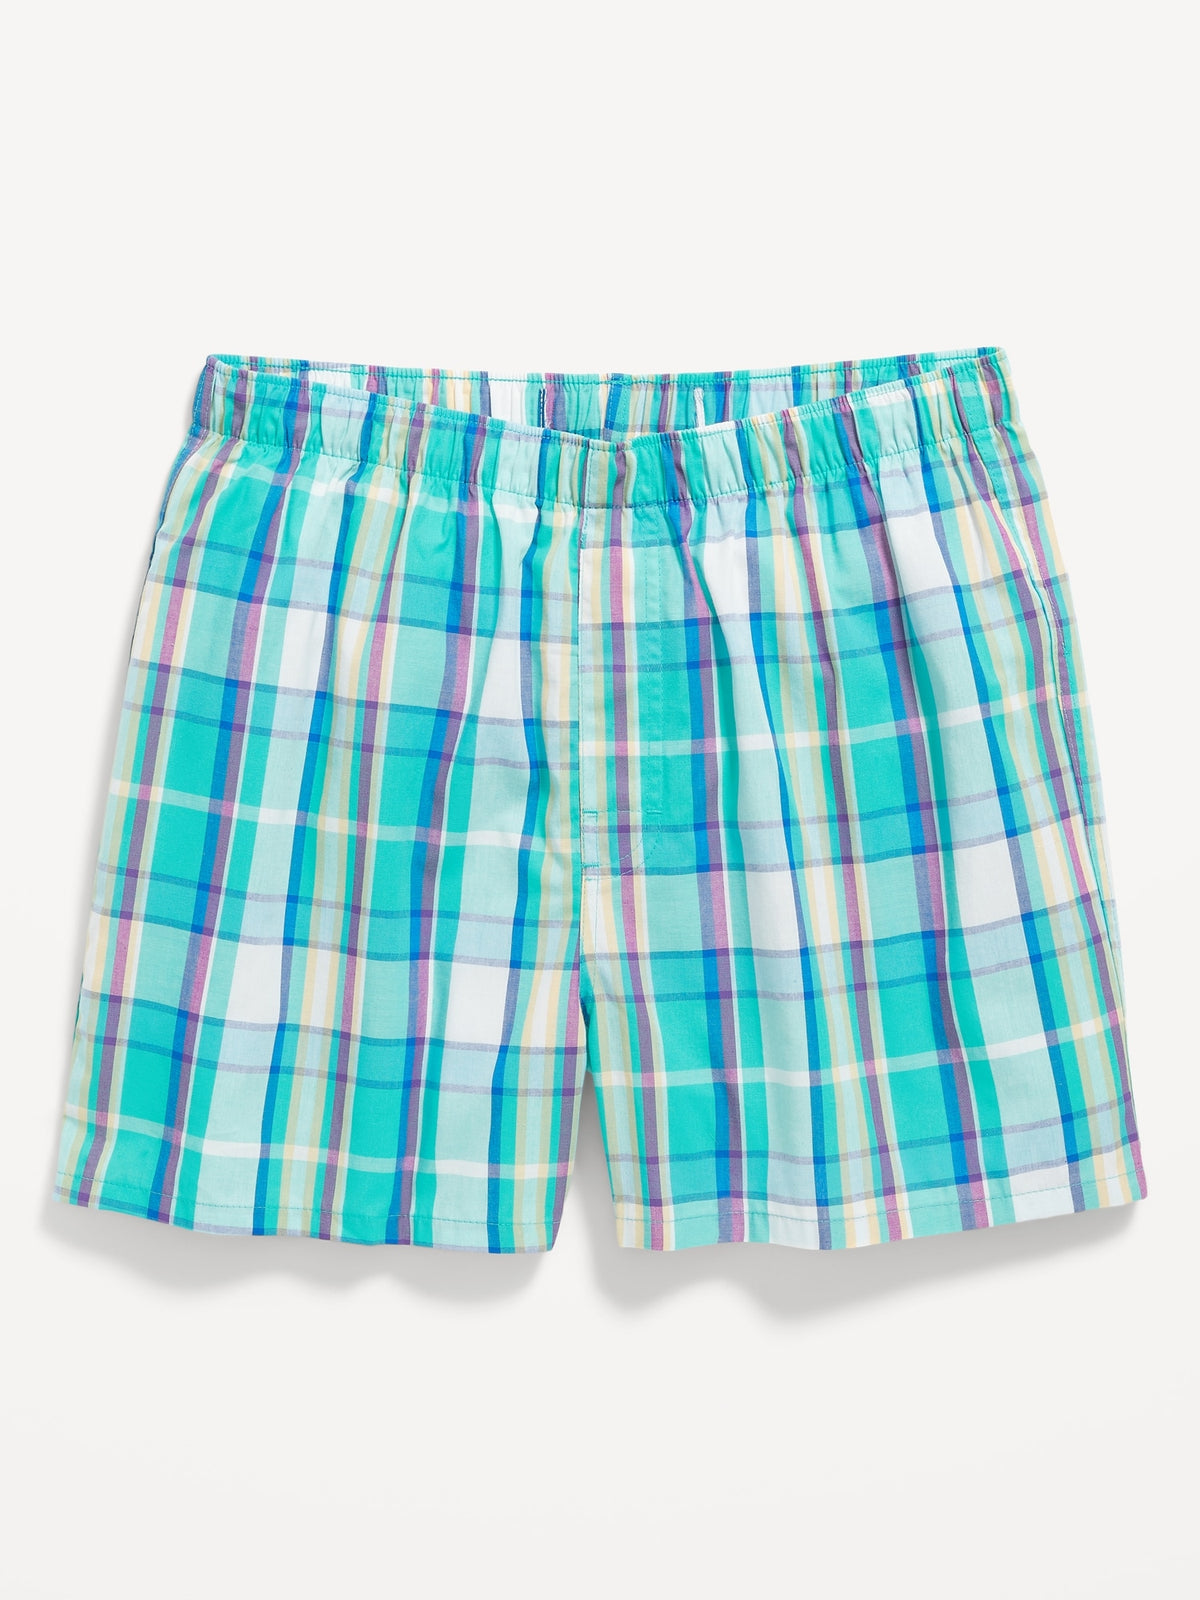 Soft-Washed Boxer Shorts for Men -- 3.75-inch inseam - Old Navy Philippines